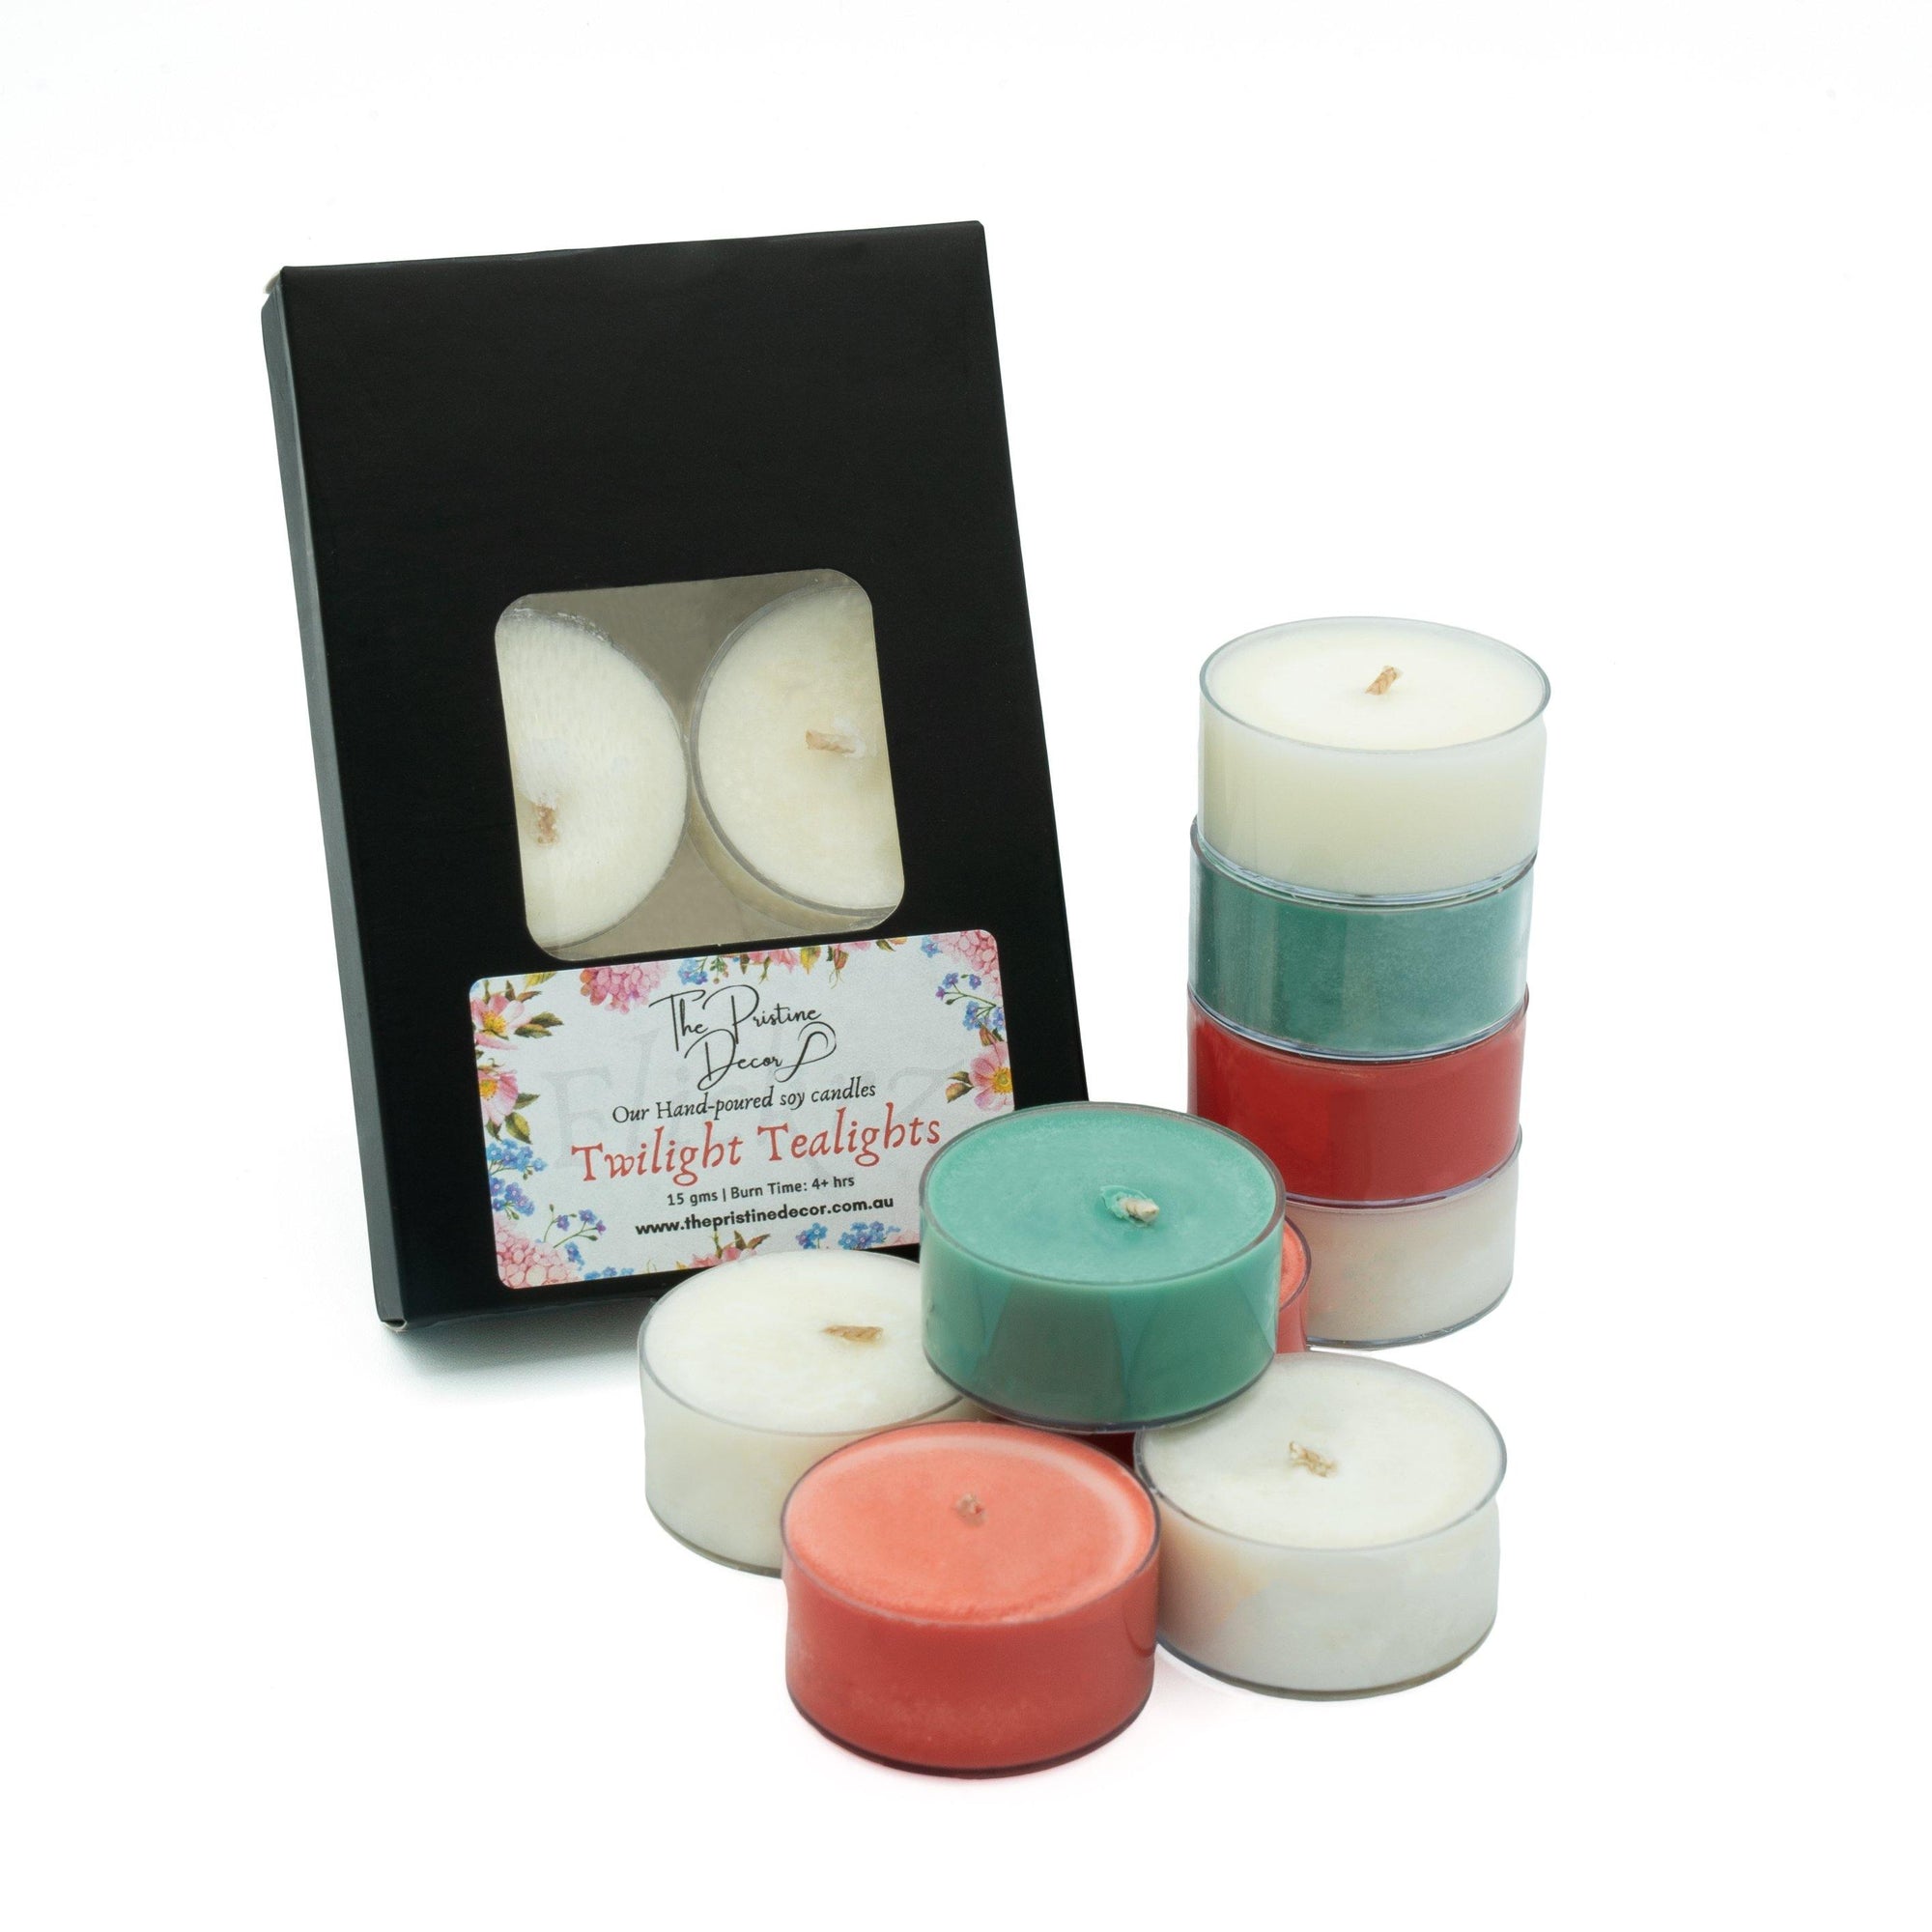 Scented Soy Tealights - Eco-Friendly, Affordable, Gifts